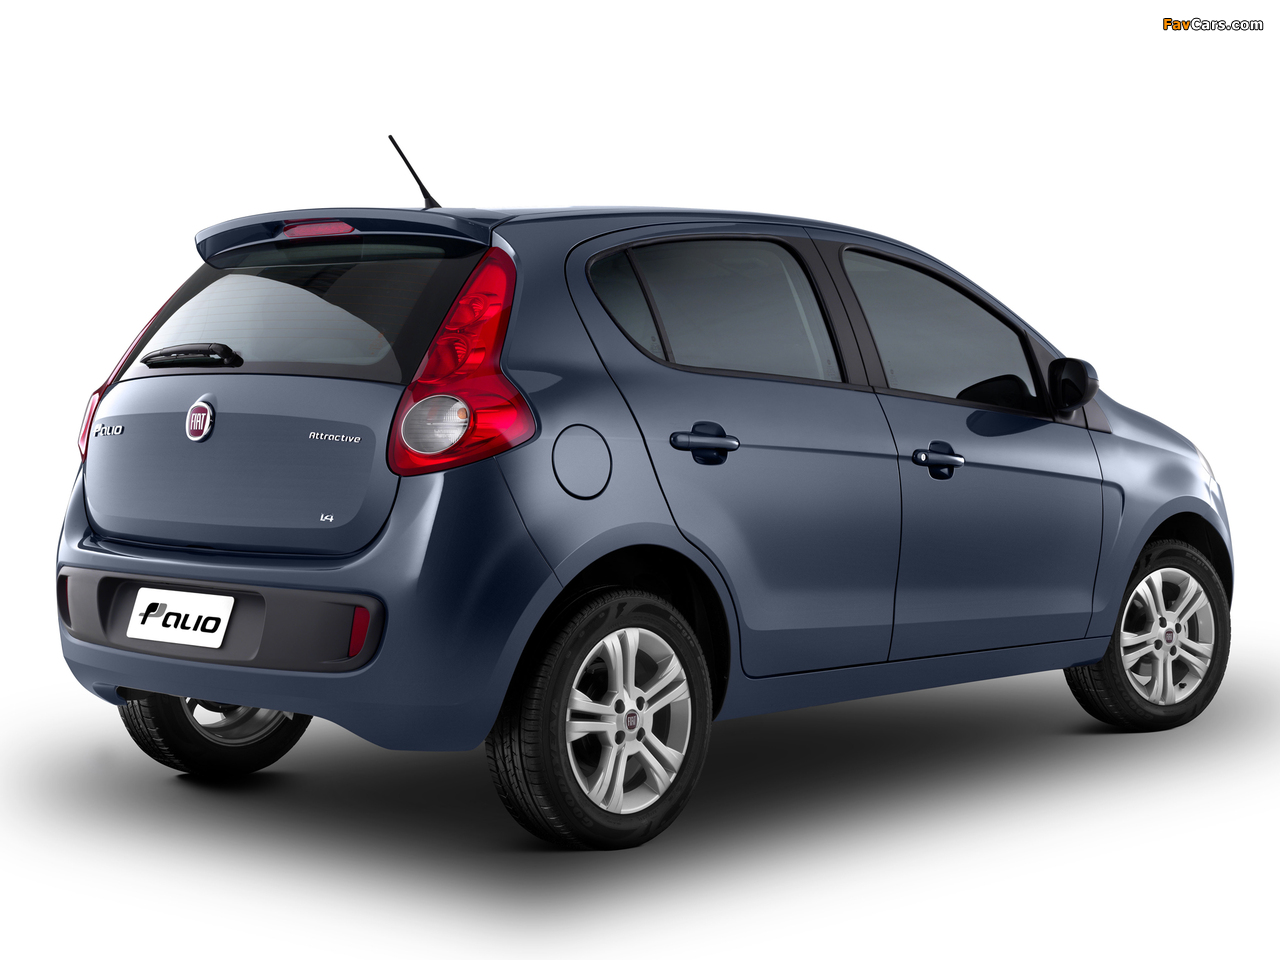 Images of Fiat Palio Attractive (326) 2011 (1280 x 960)